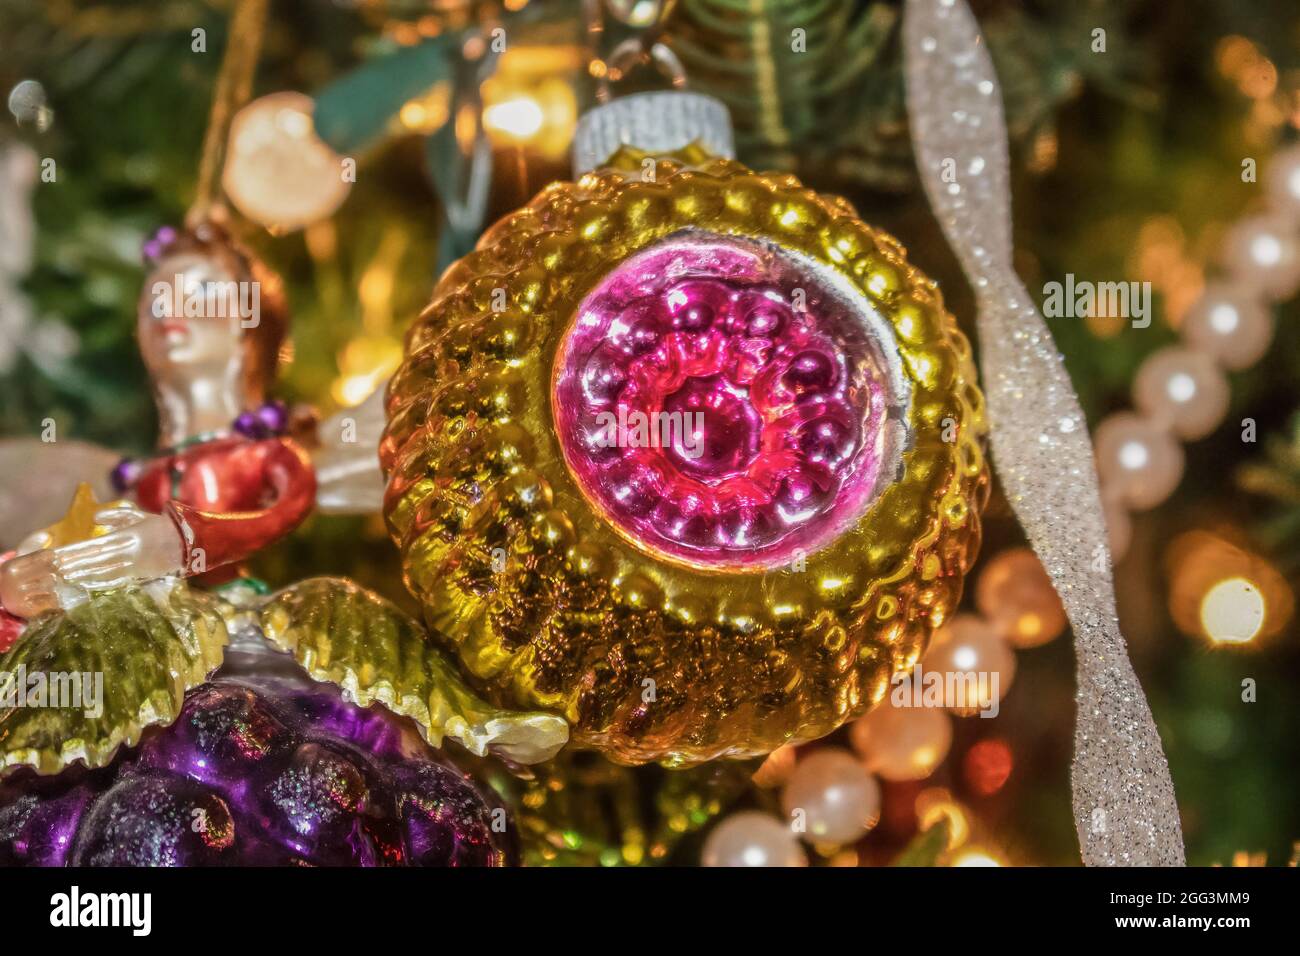 Retro Christmas ornament hanging on green Christmas tree with other decorations blurred behind Stock Photo